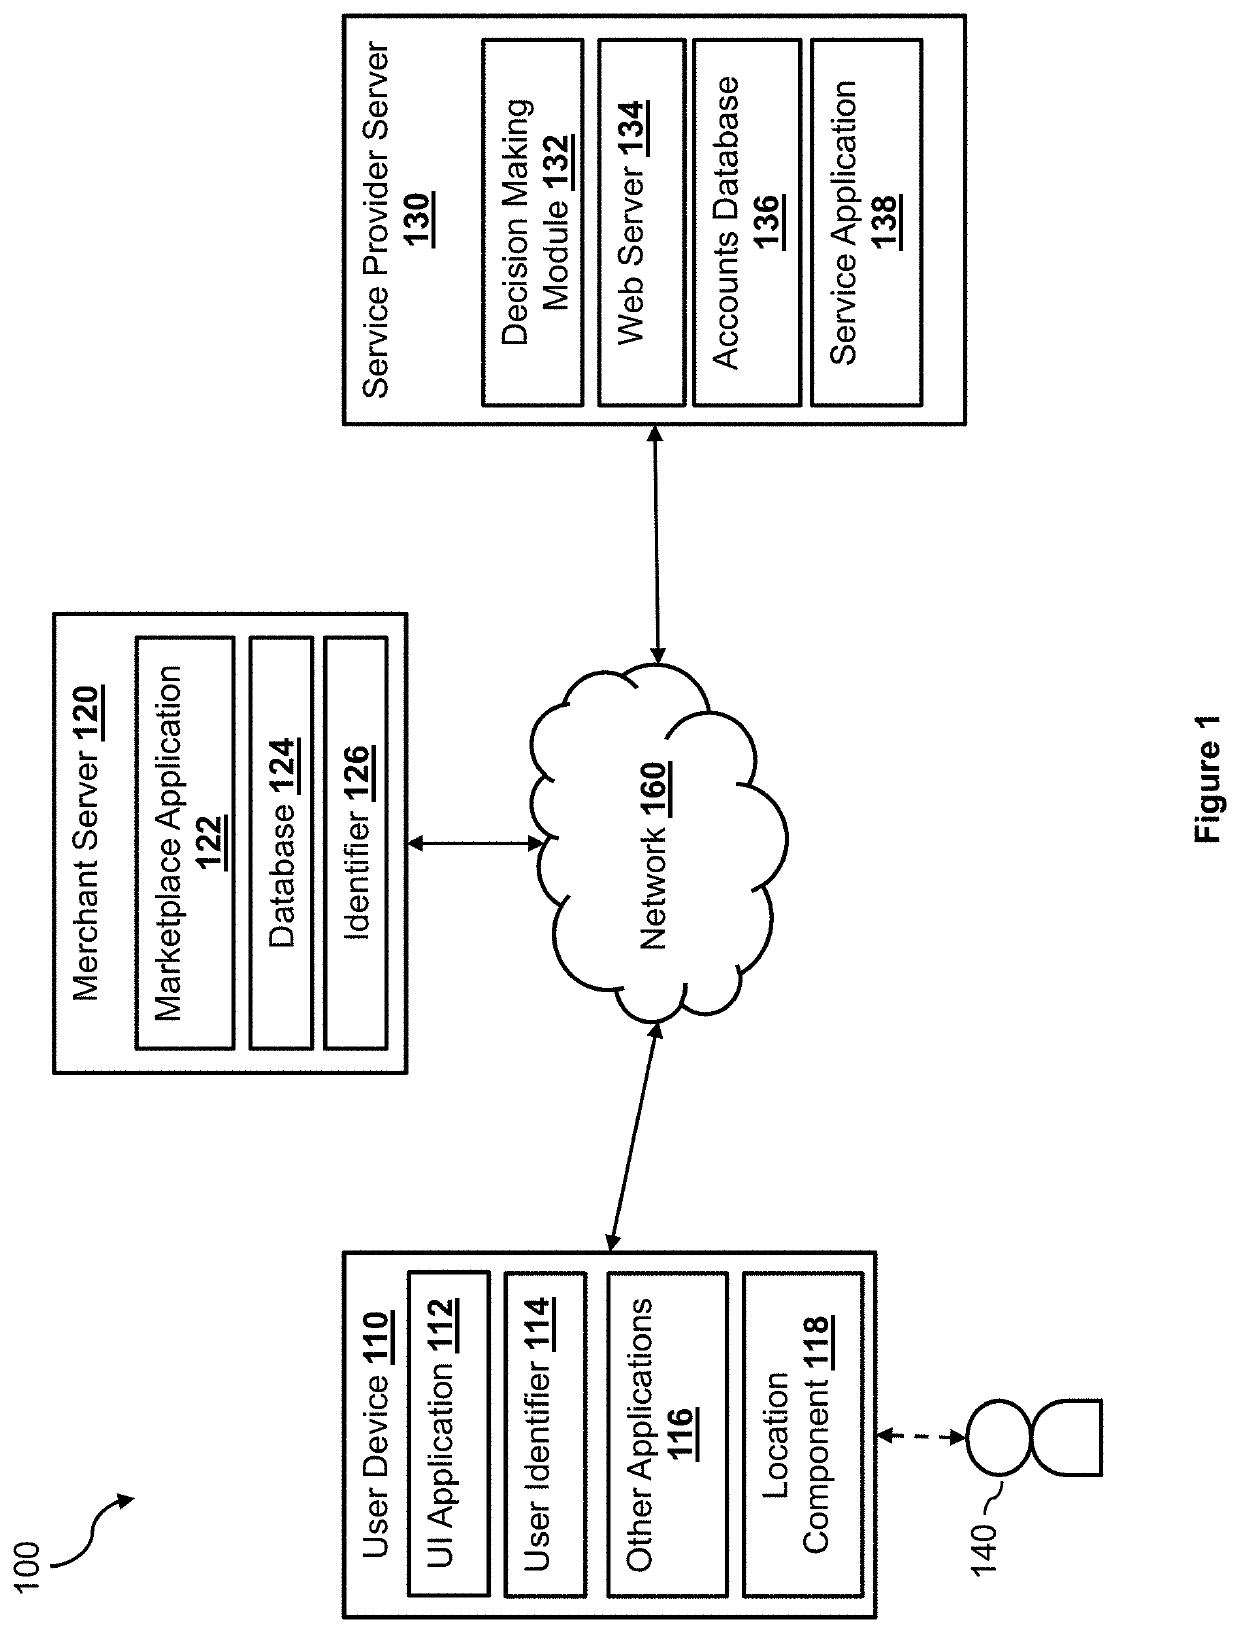 Systems and methods for configuring an online decision engine